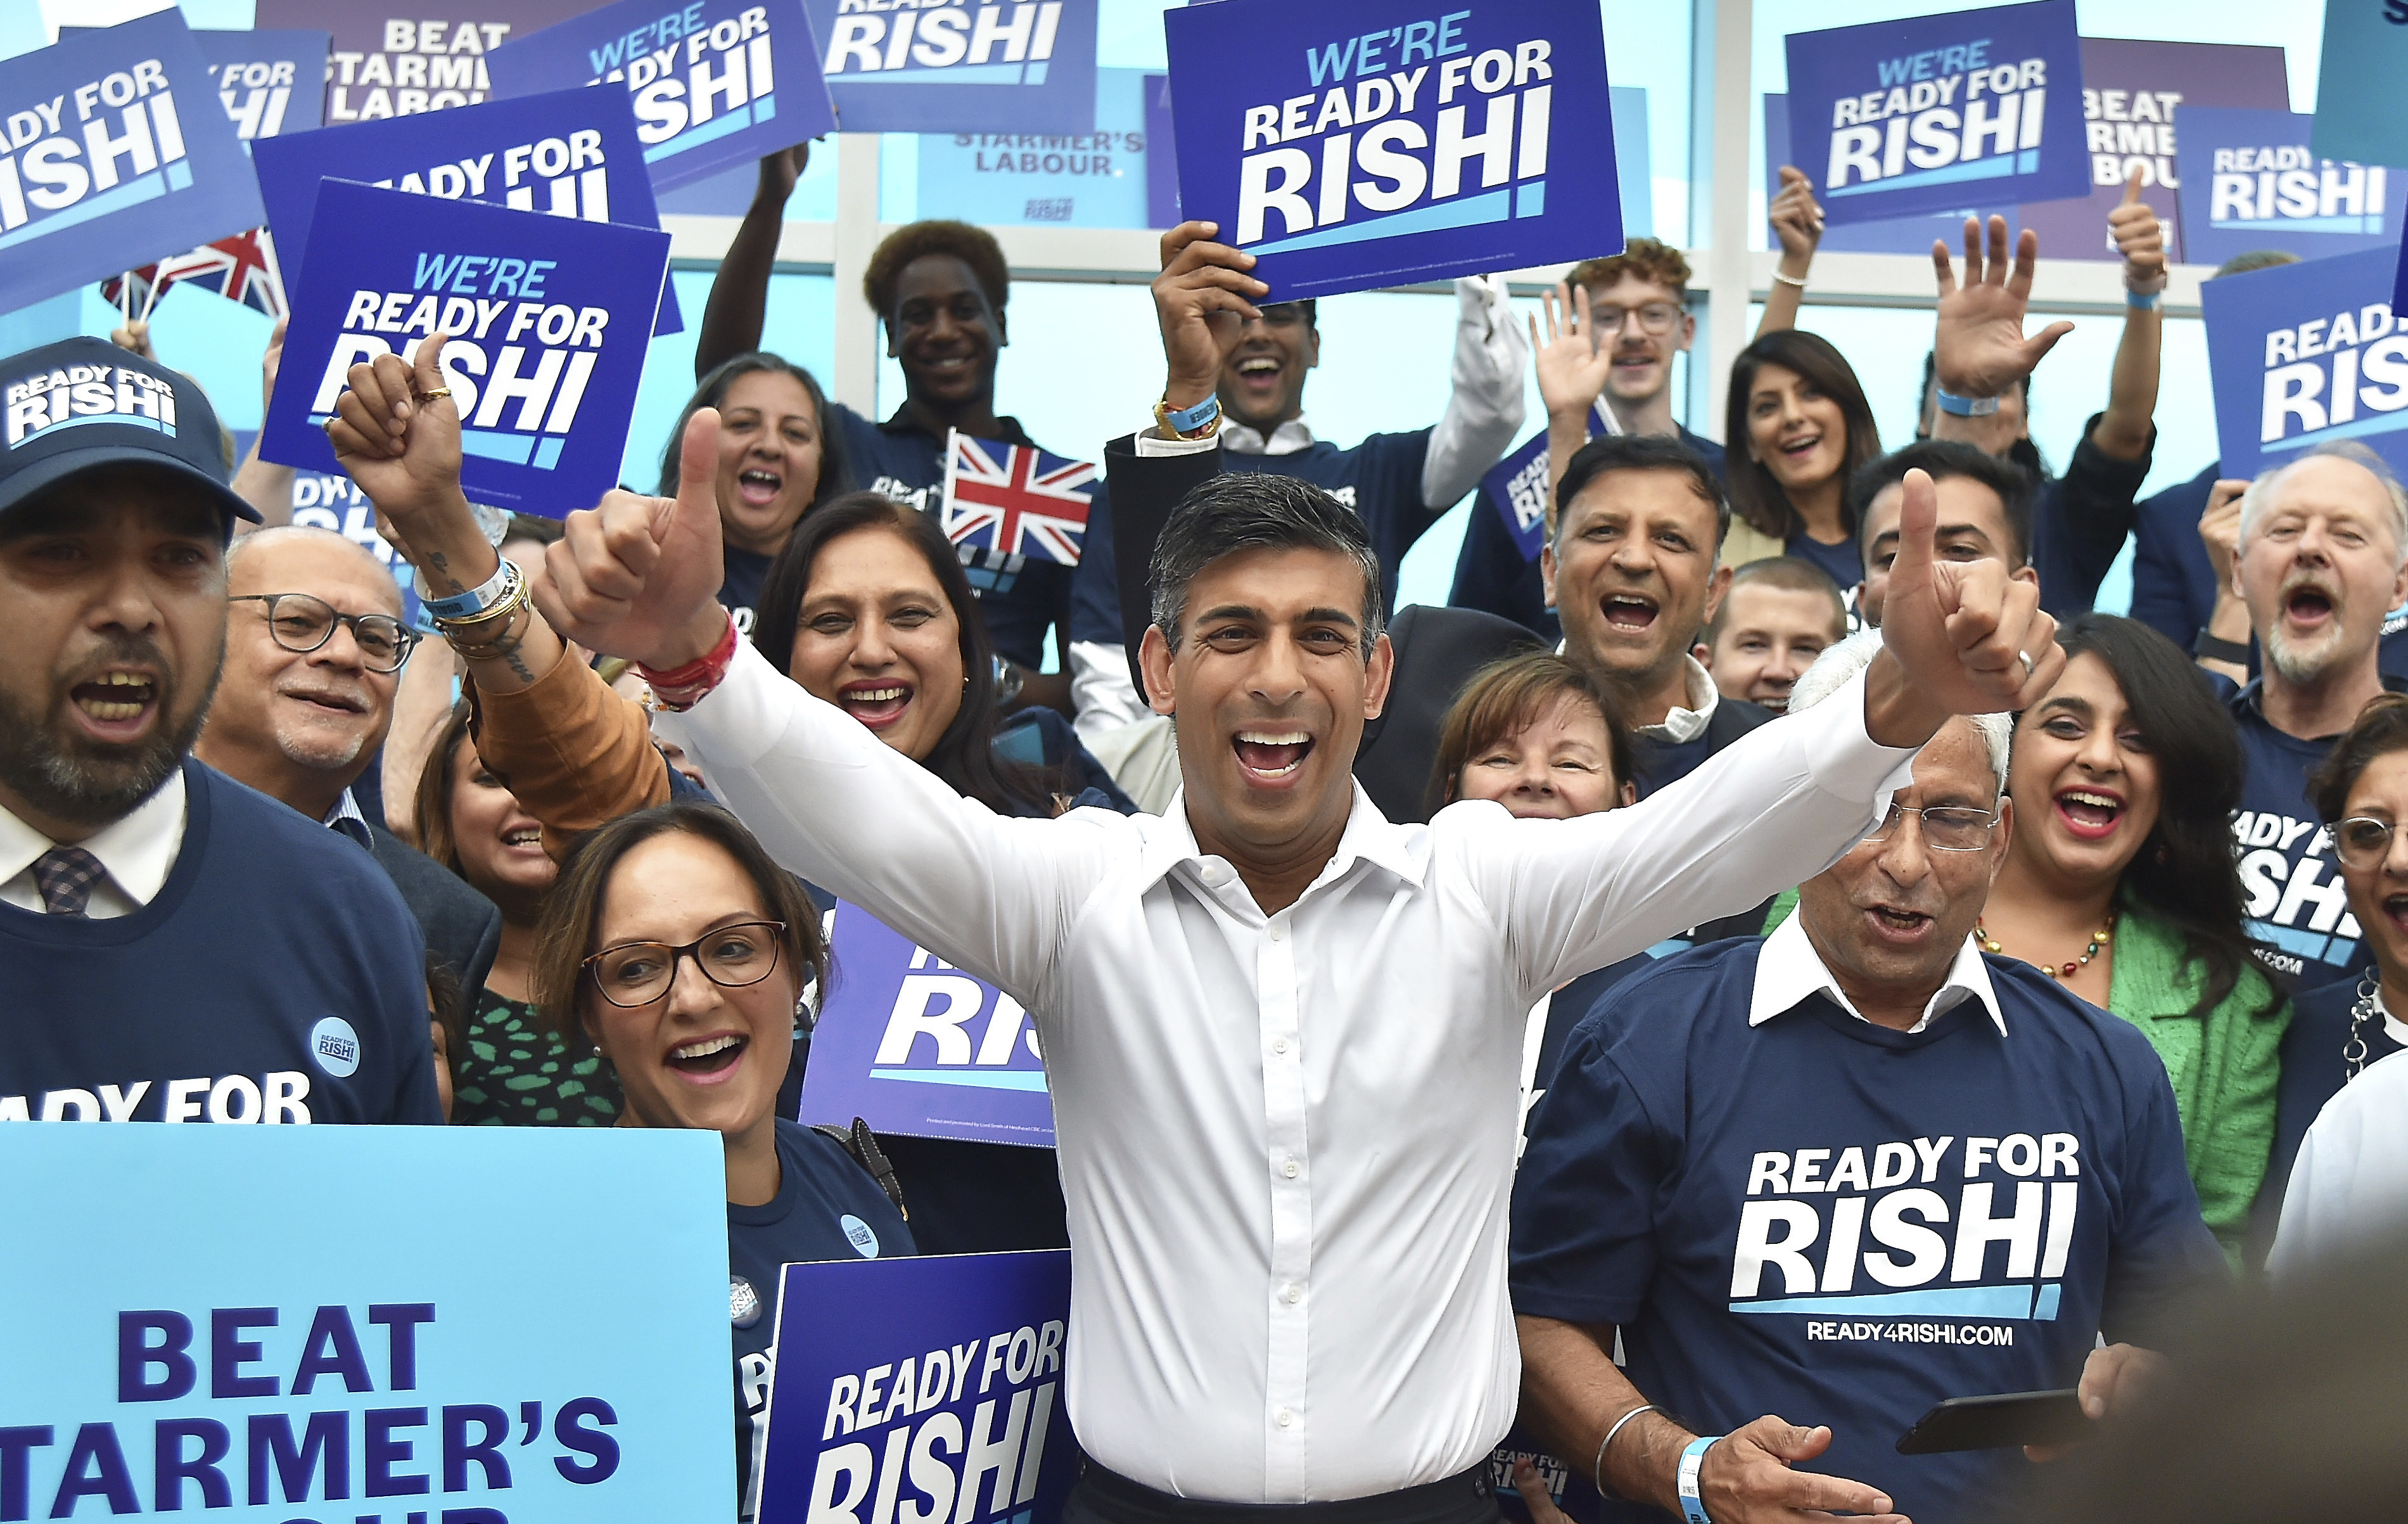 FILE - Rishi Sunak meets supporters as he arrives to attend a Conservative Party leadership election hustings at the NEC, Birmingham, England, Tuesday, Aug. 23, 2022. (AP Photo/Rui Vieira, File)